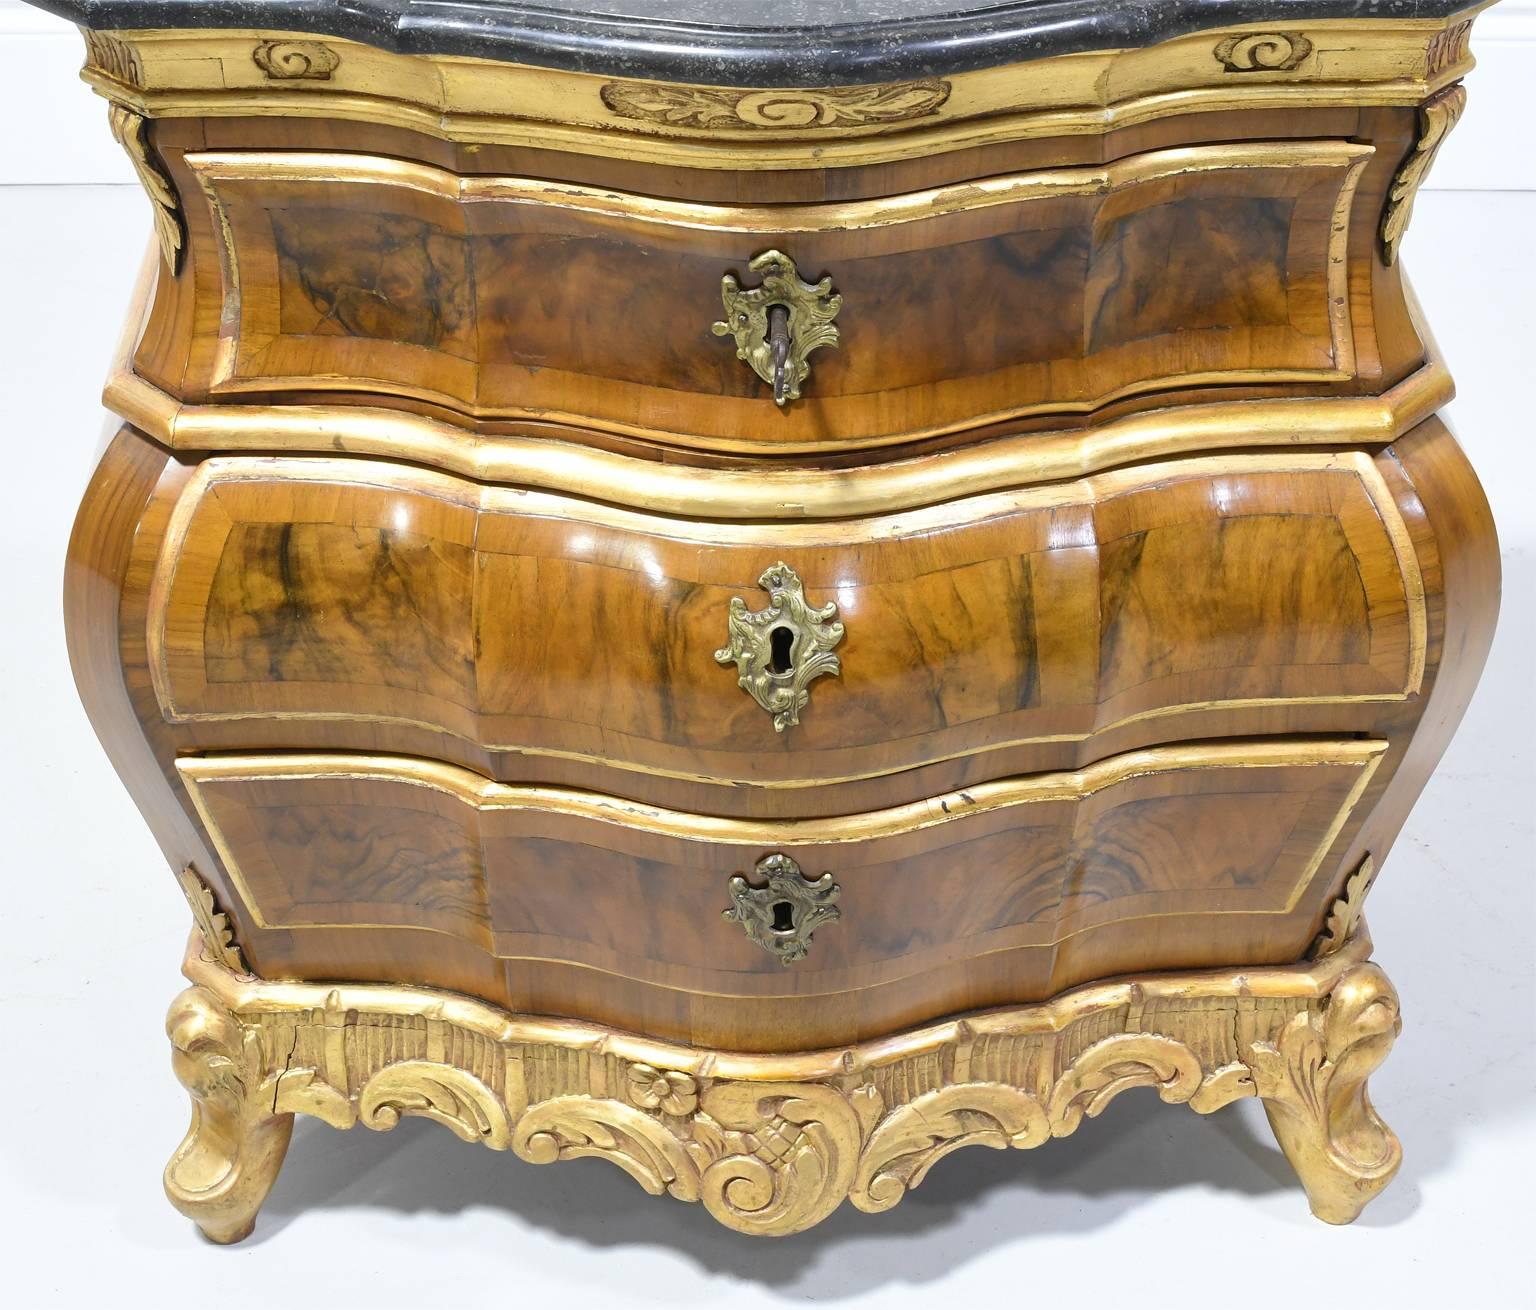 A very lovely Rococo style chest with bombe front in walnut, with black marble top and parcel-gilt details, offering three drawers, Denmark, circa mid- late 1800s.
Measures: 28